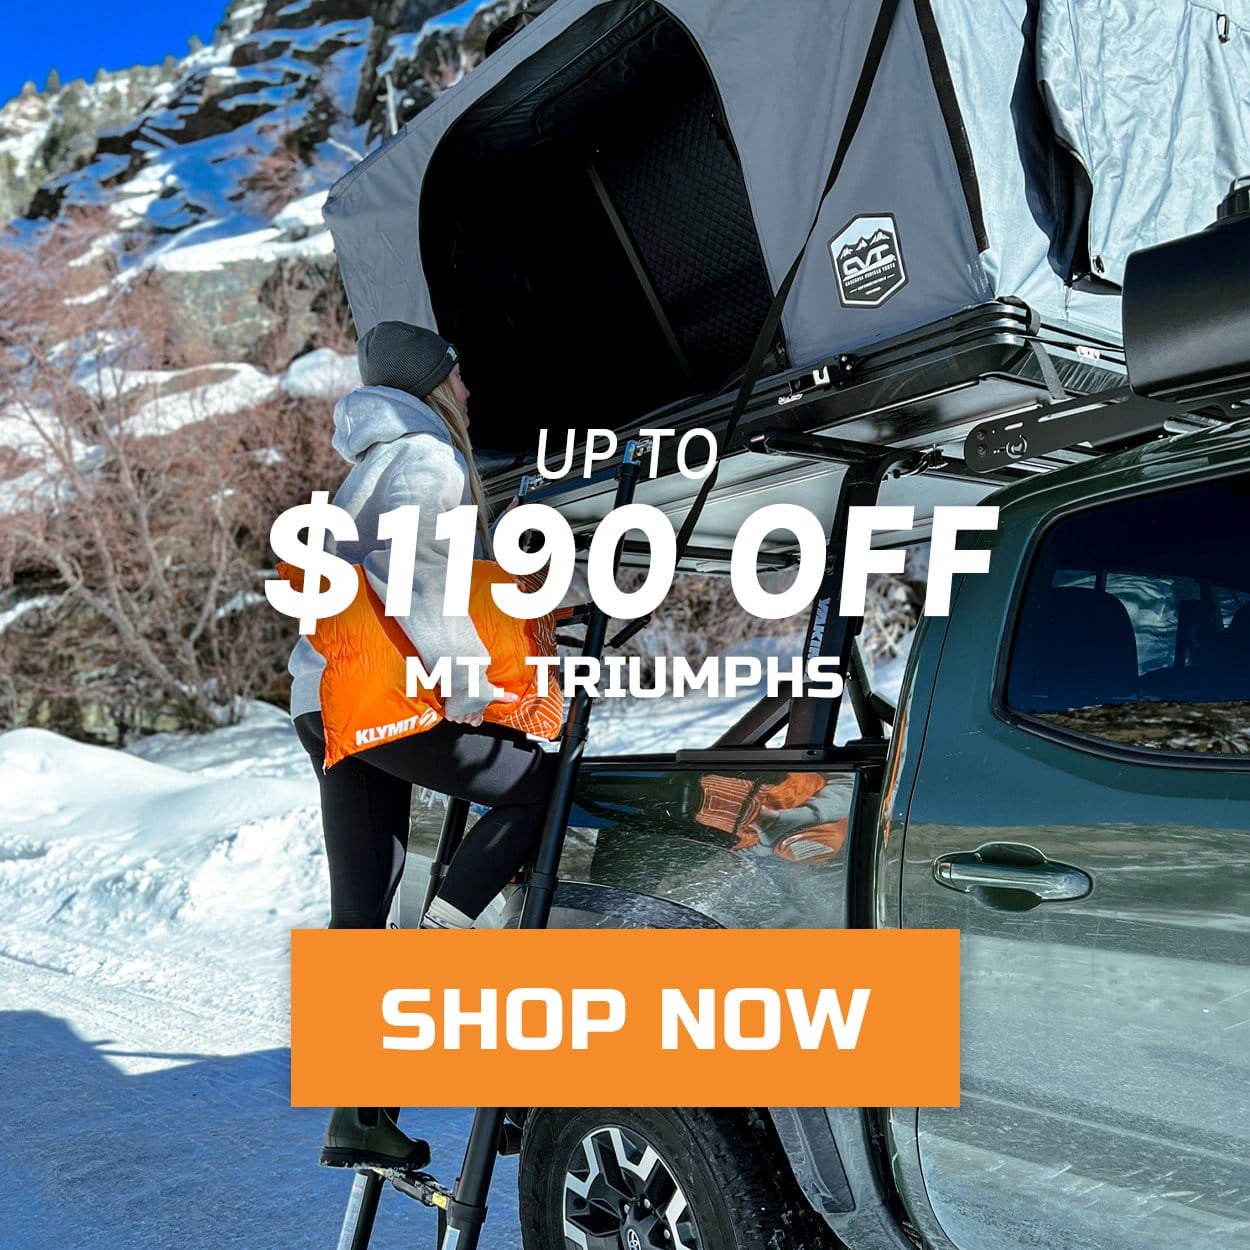 Up to \\$1190 off Mt Triumphs